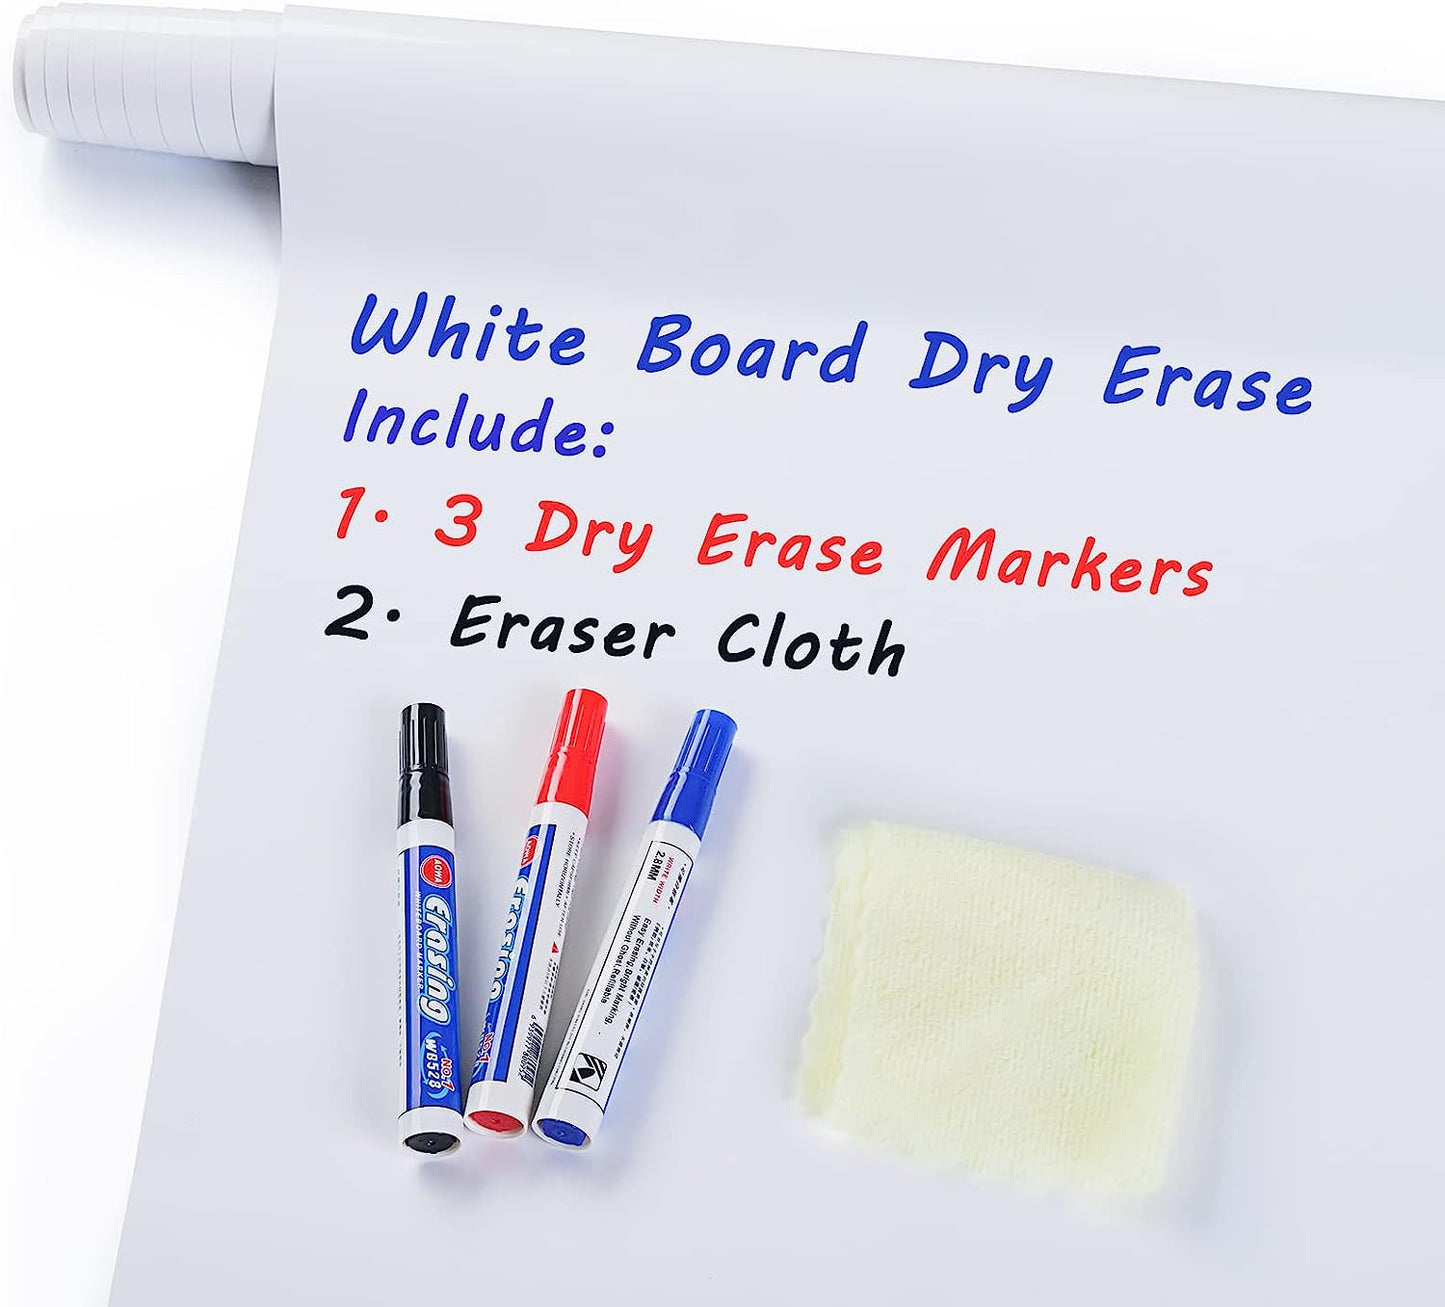 White Board Dry Erase, 17.7×98.4 Inch Long with 3 Dry Erase Marker, Peel and Stick Whiteboard Paper, Dry Erase Sticker for Wall, Classroom, Office, Home and for Kids Drawing.